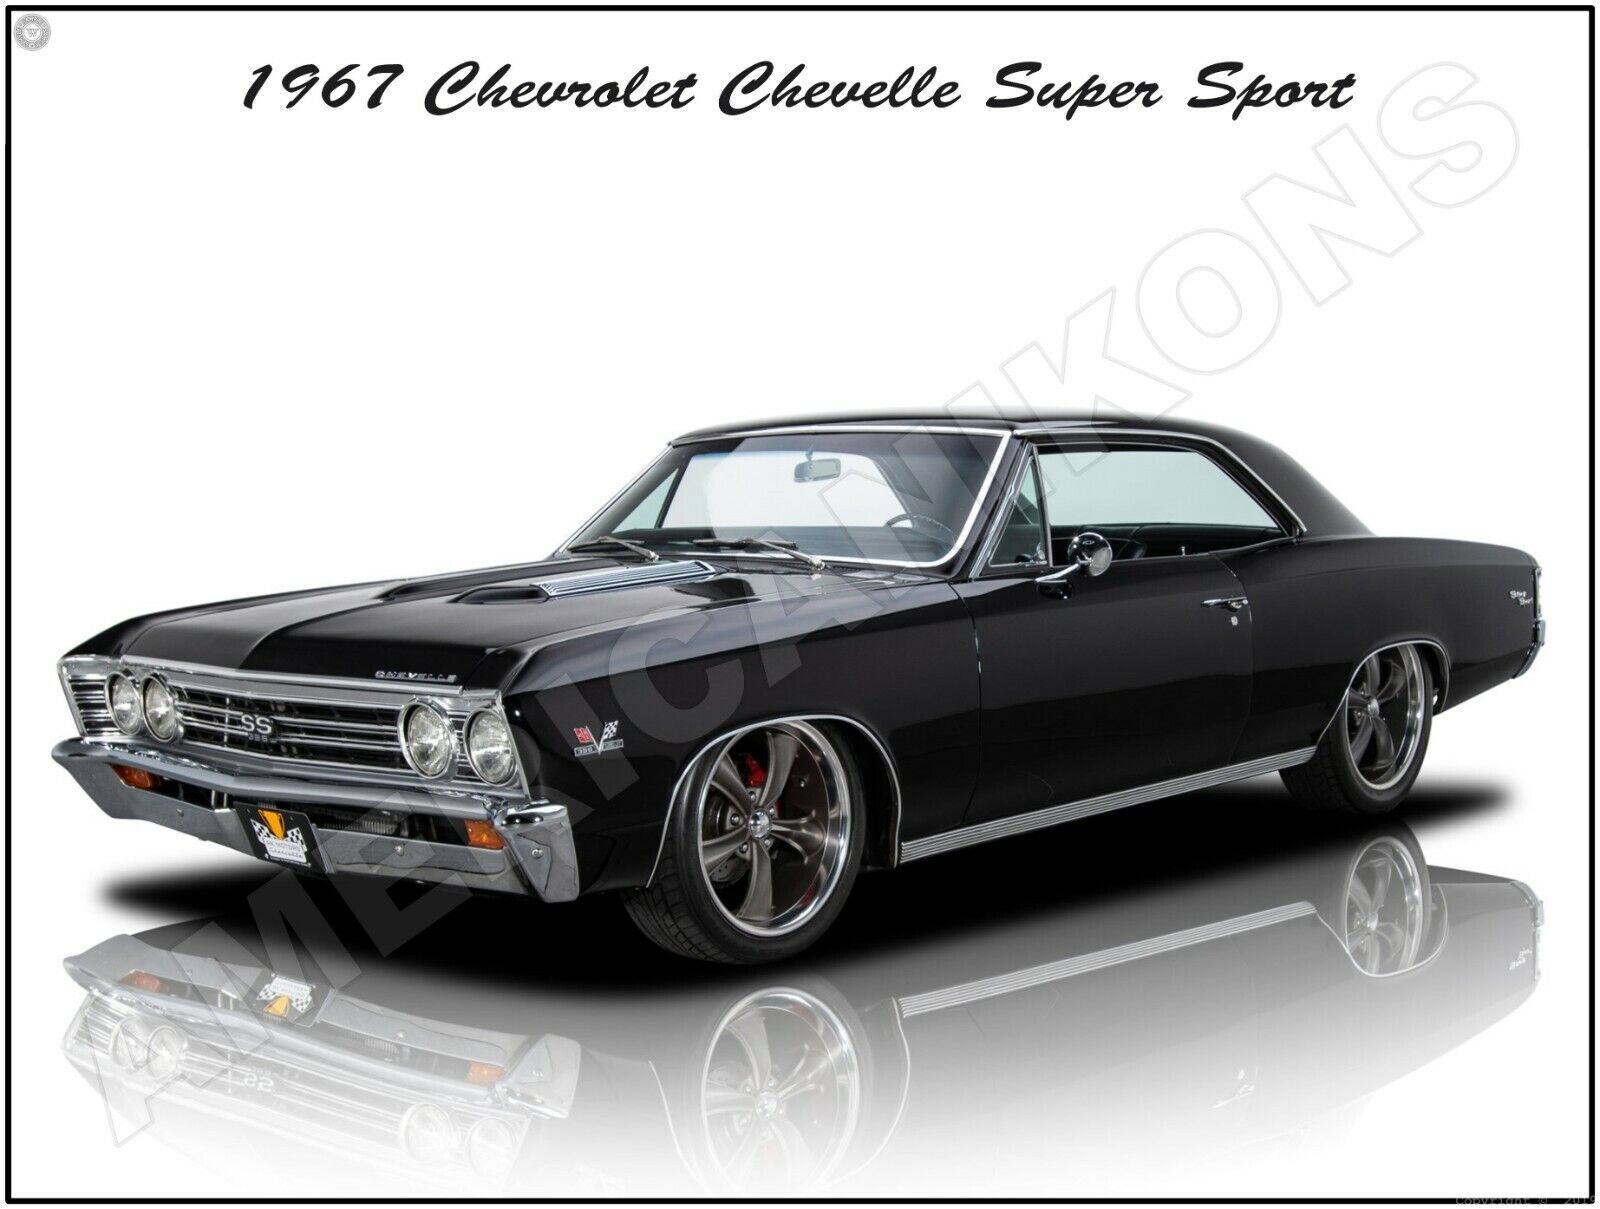 1967 Chevrolet Chevelle Super Sport Hot Rod New Metal Sign: Large Size